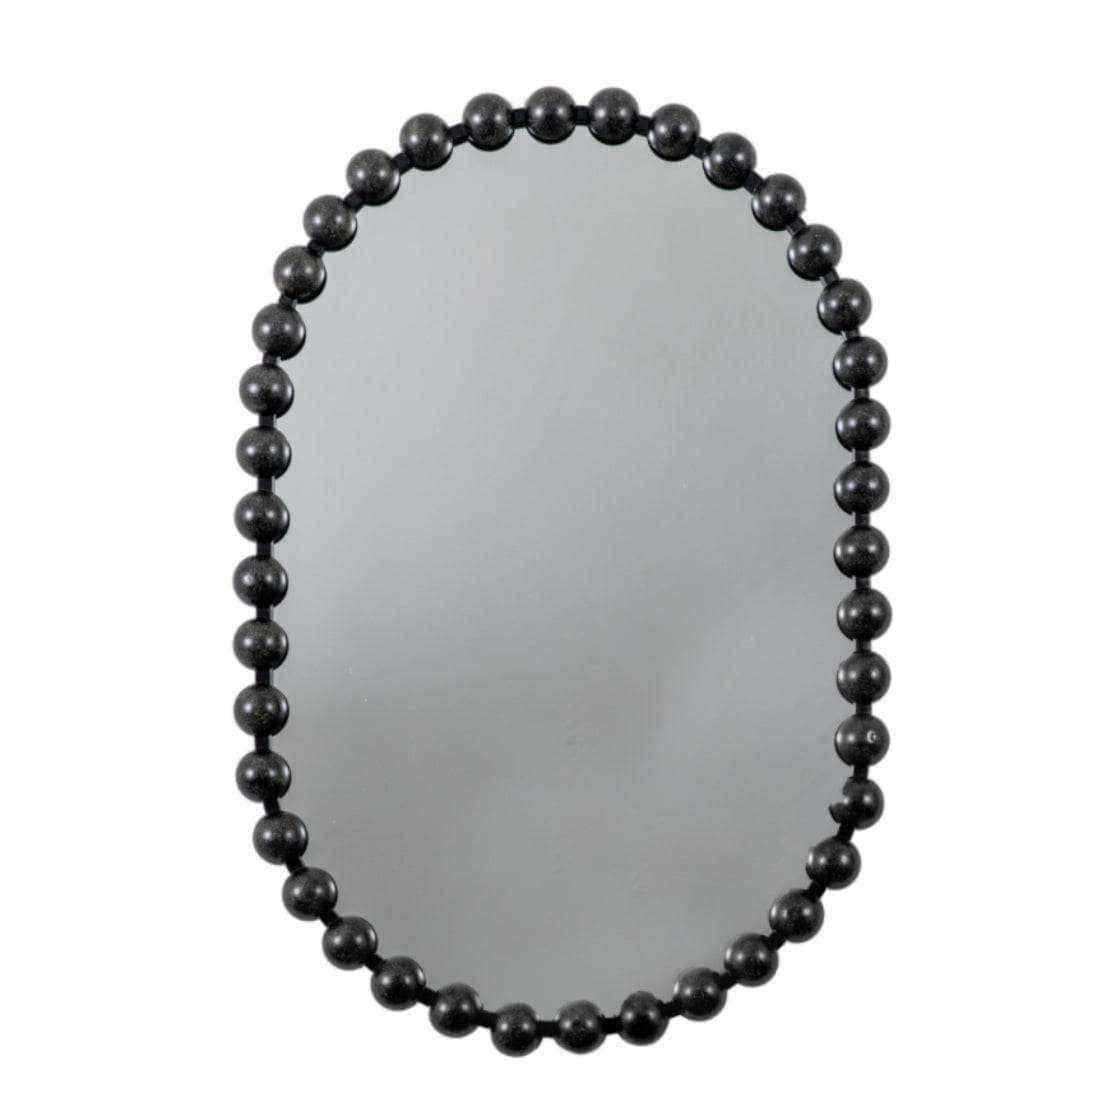 Distressed Black Large Beaded Portrait Mirror - The Farthing